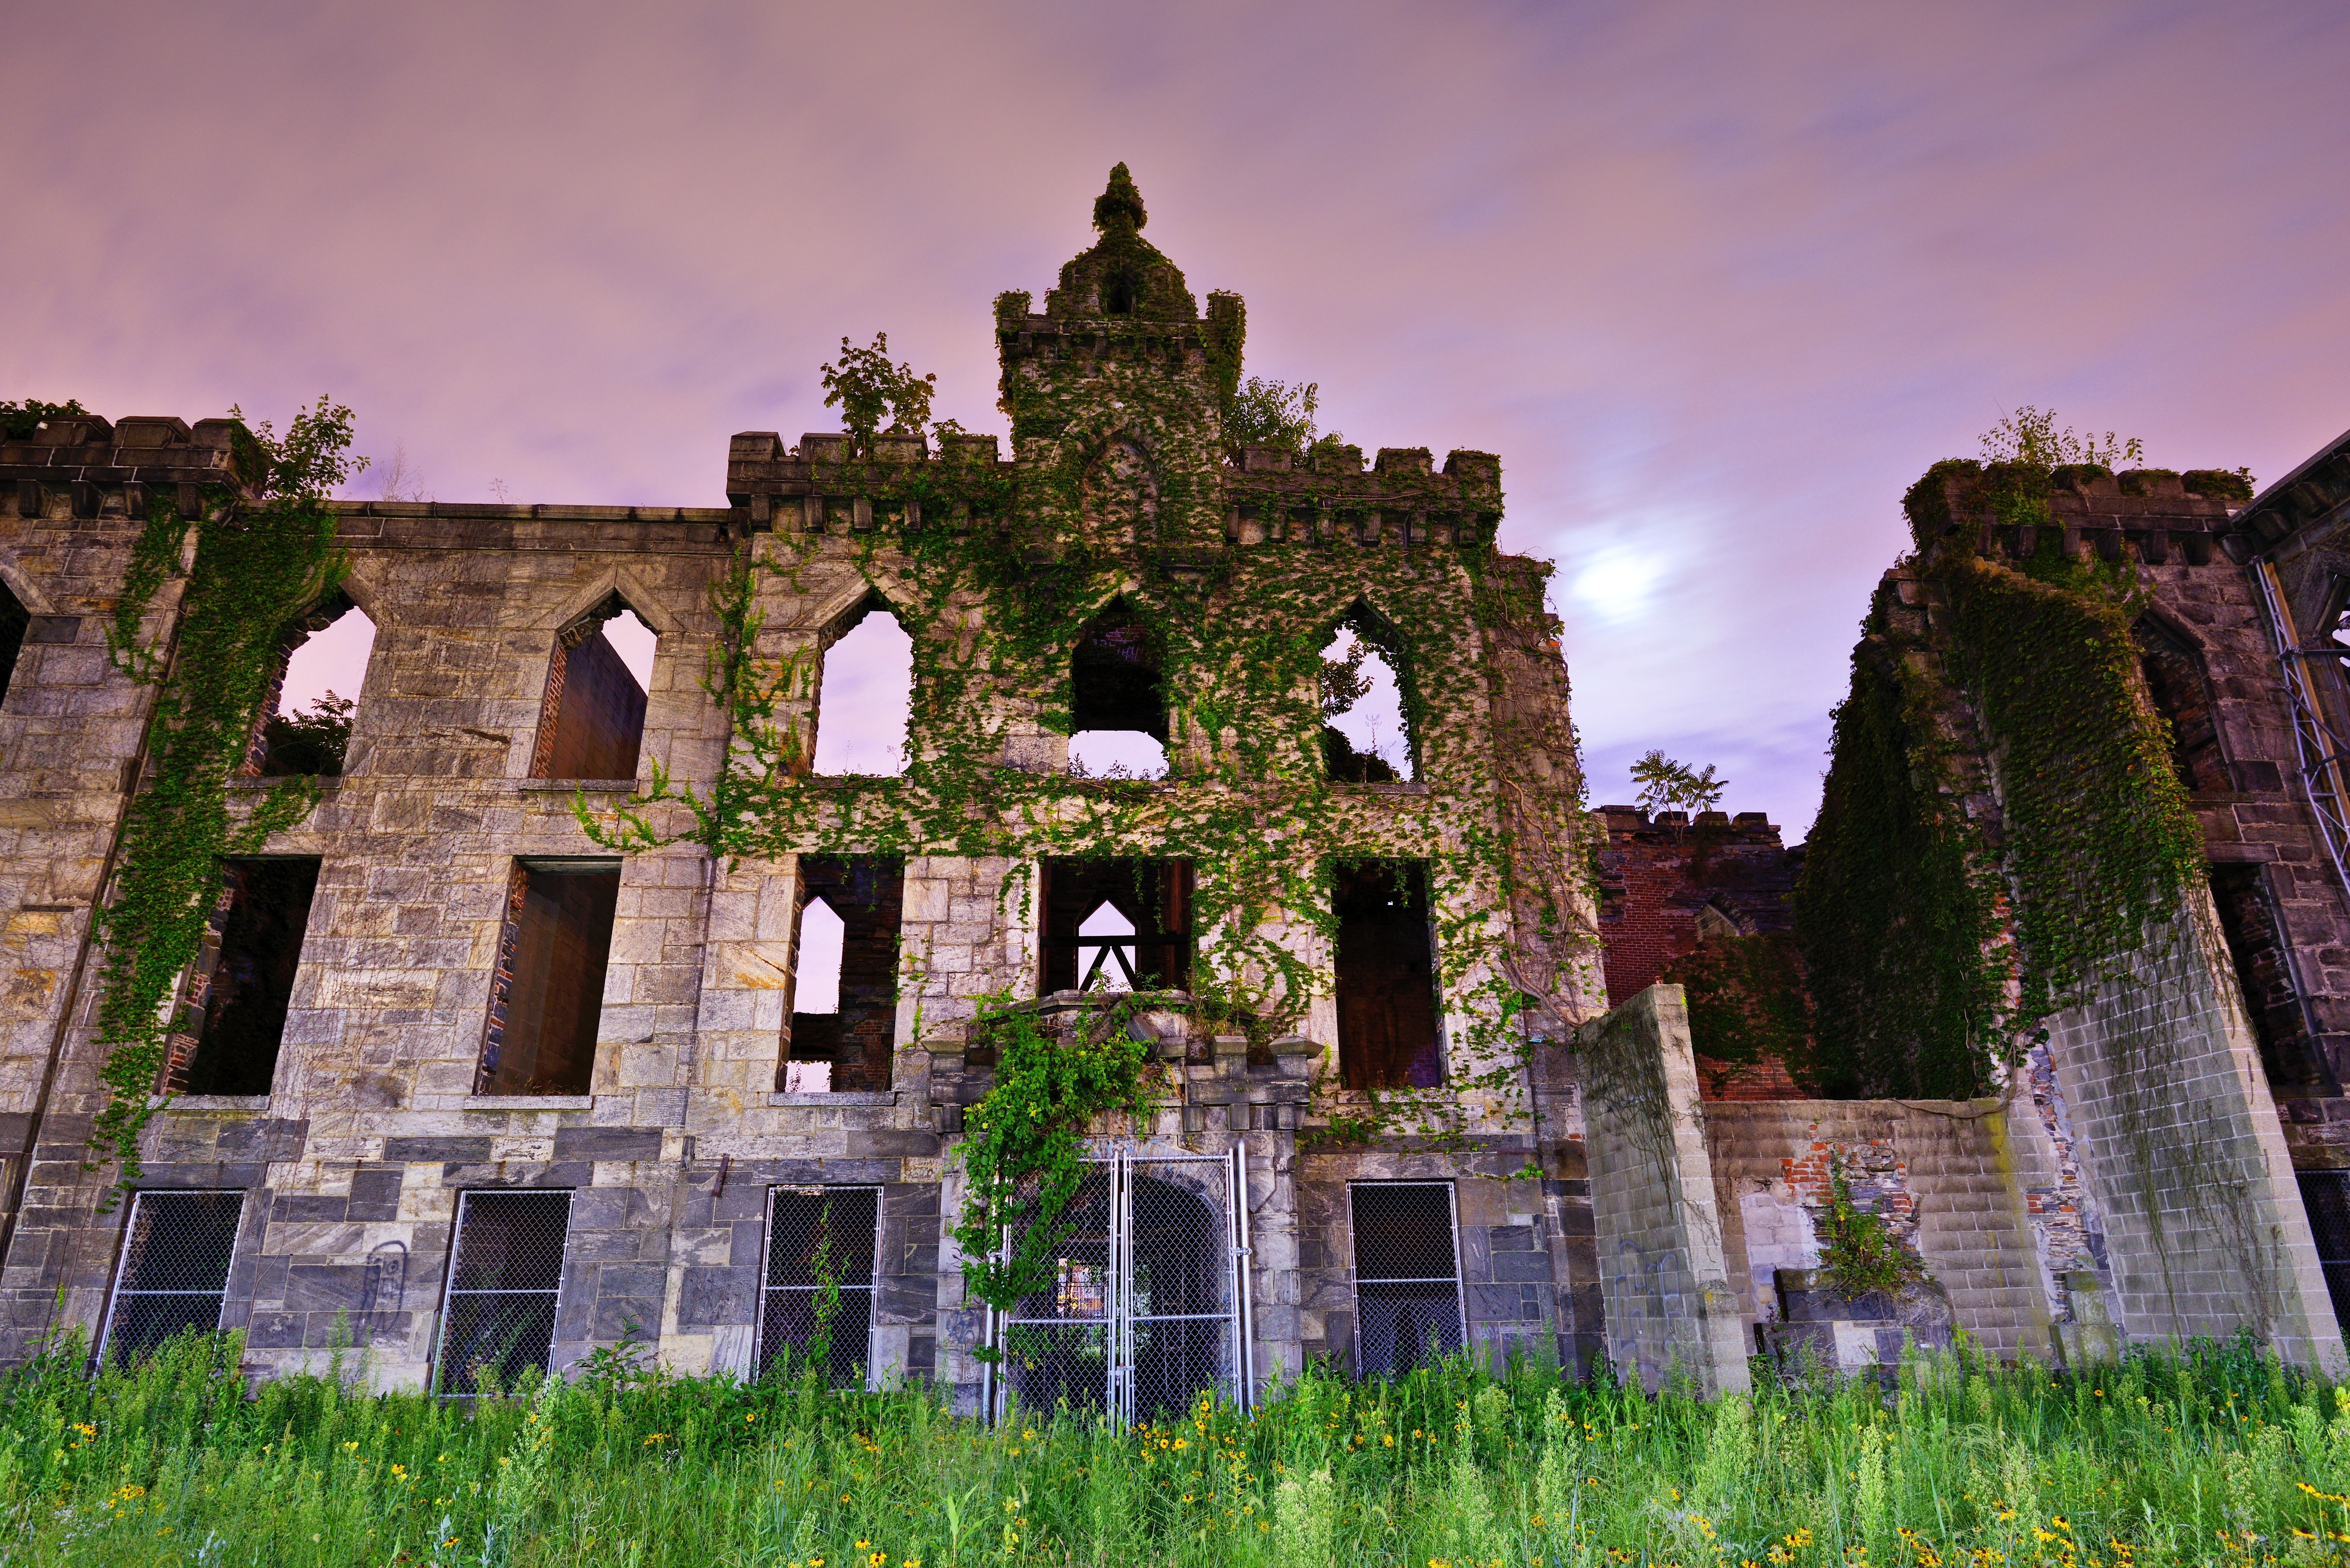 The exterior of the Renwick Smallpox Hospital. The building is abandoned. There are multiple windows and the facade is stone. There is moss growing on some parts of the facade. It is evening and the sky is purple.